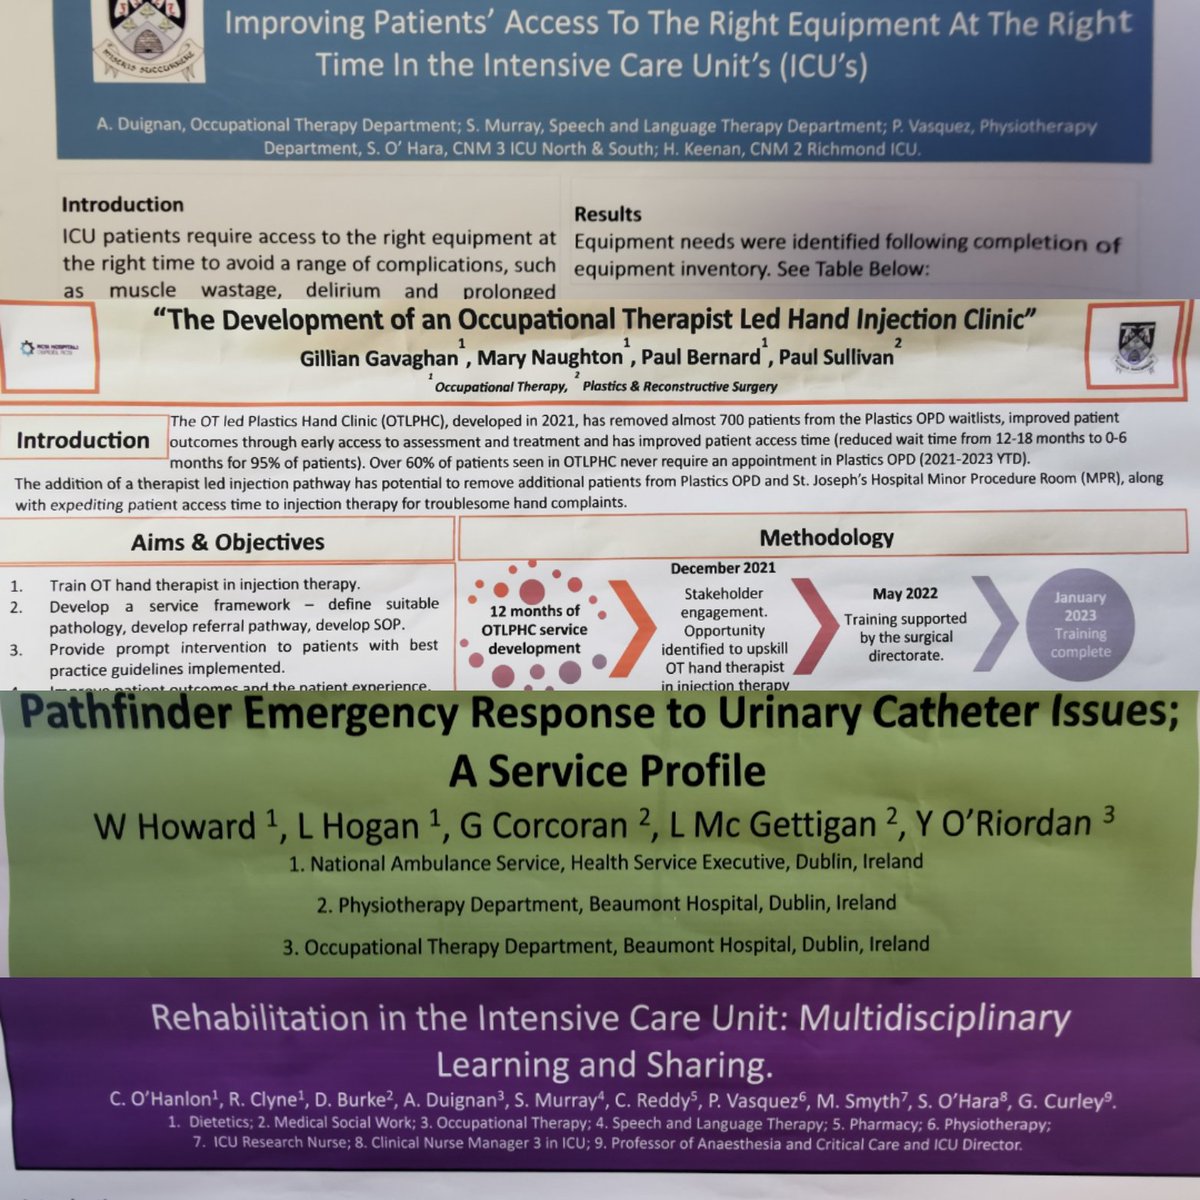 @ Beaumont Quality&Patient Safety Meeting showcasing some of OT's integrated multi-d work enhancing pt access to timely effective treatment. Posters from ICU, Hand Therapy & Plastics & Pathfinder (OT, PT, NAS) 👏To the organising team for creating this opportunity #Beaumont23